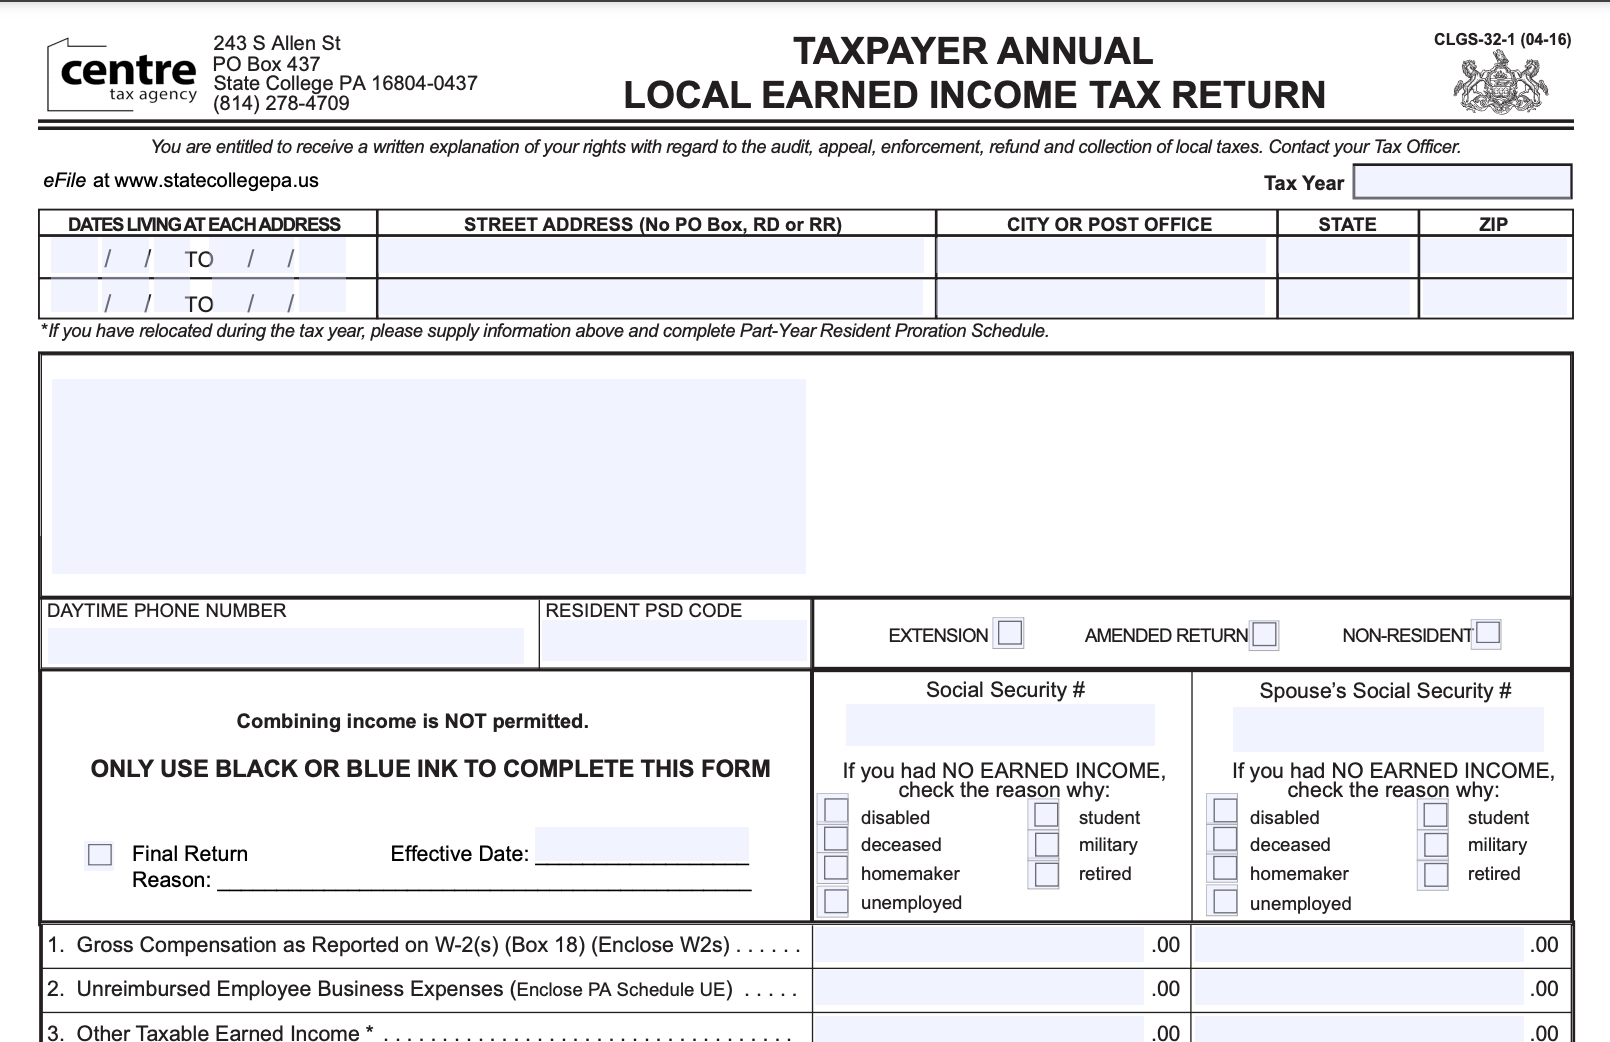 late-filing-penalties-on-local-tax-returns-in-centre-county-waived